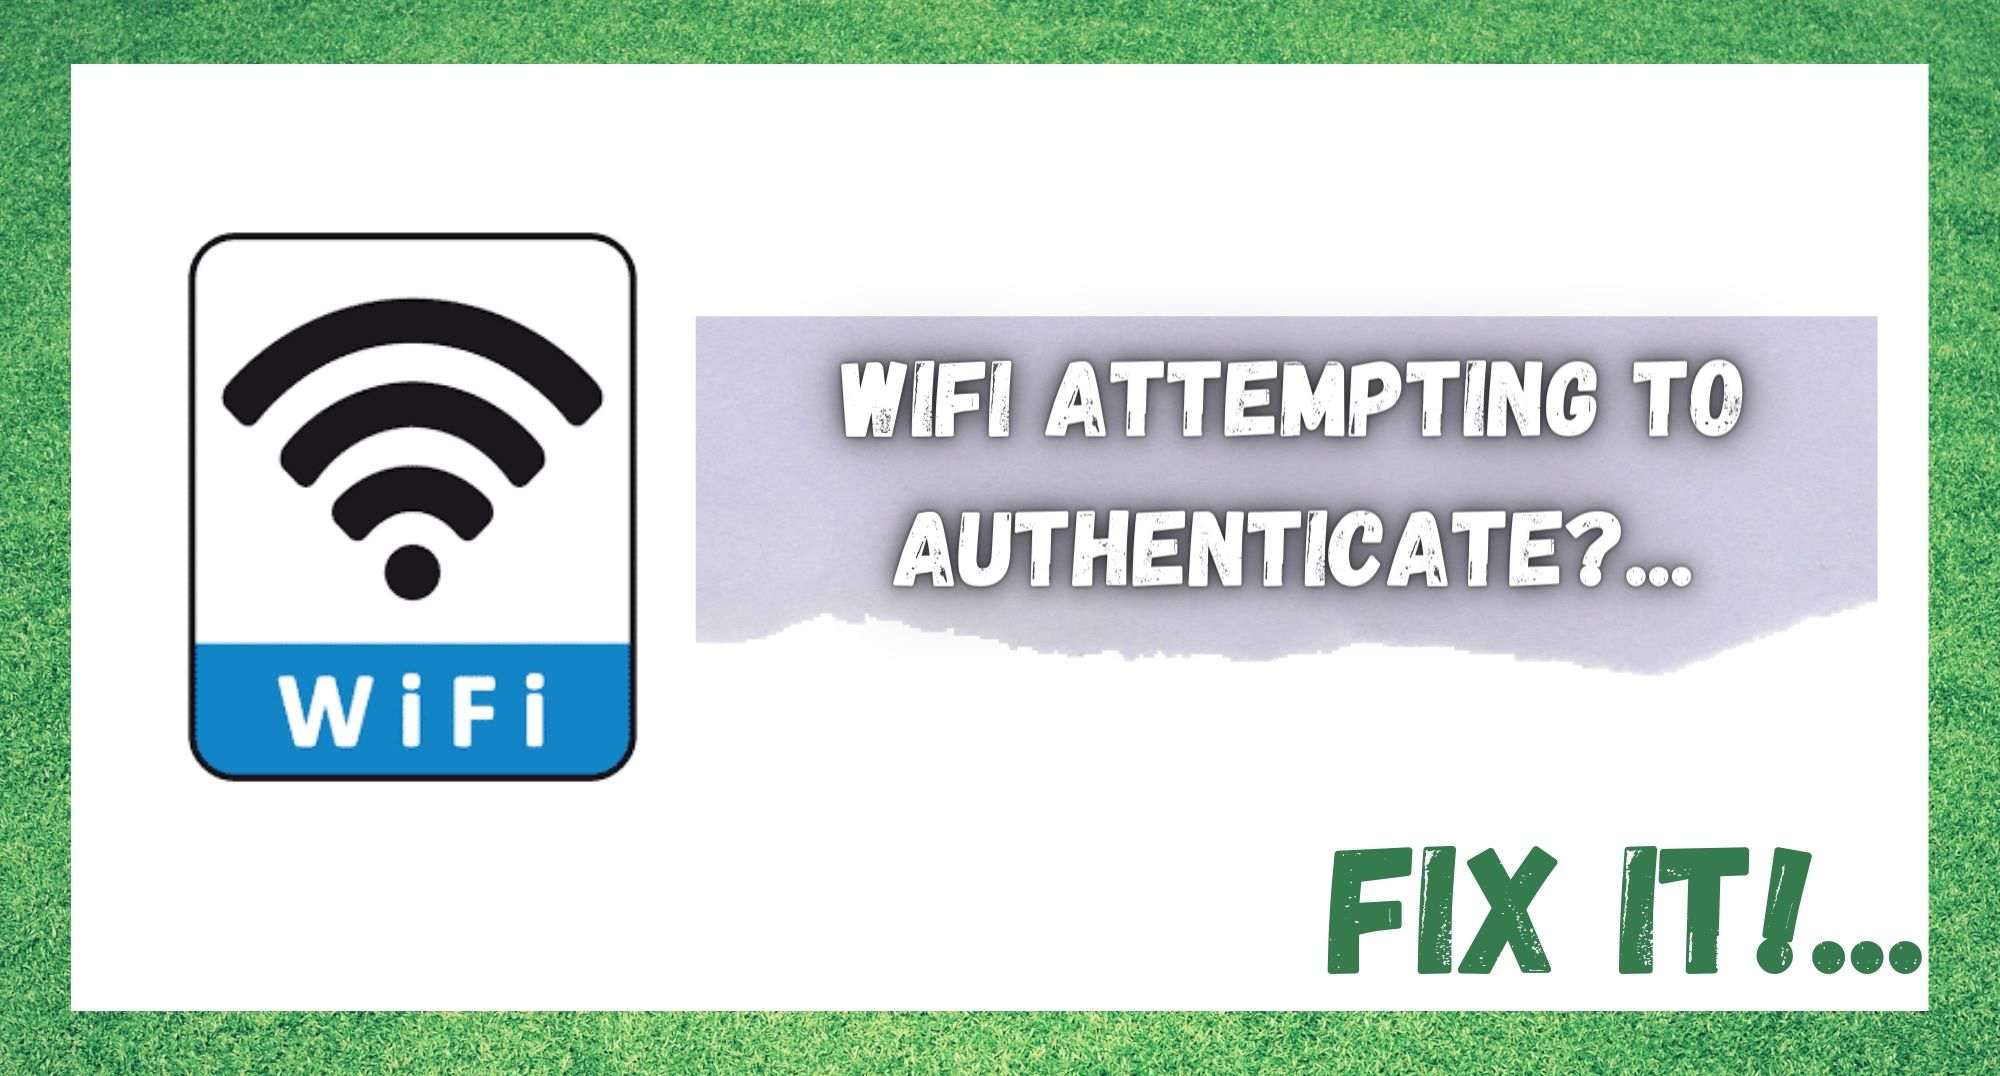 WiFi Attempting To Authenticate